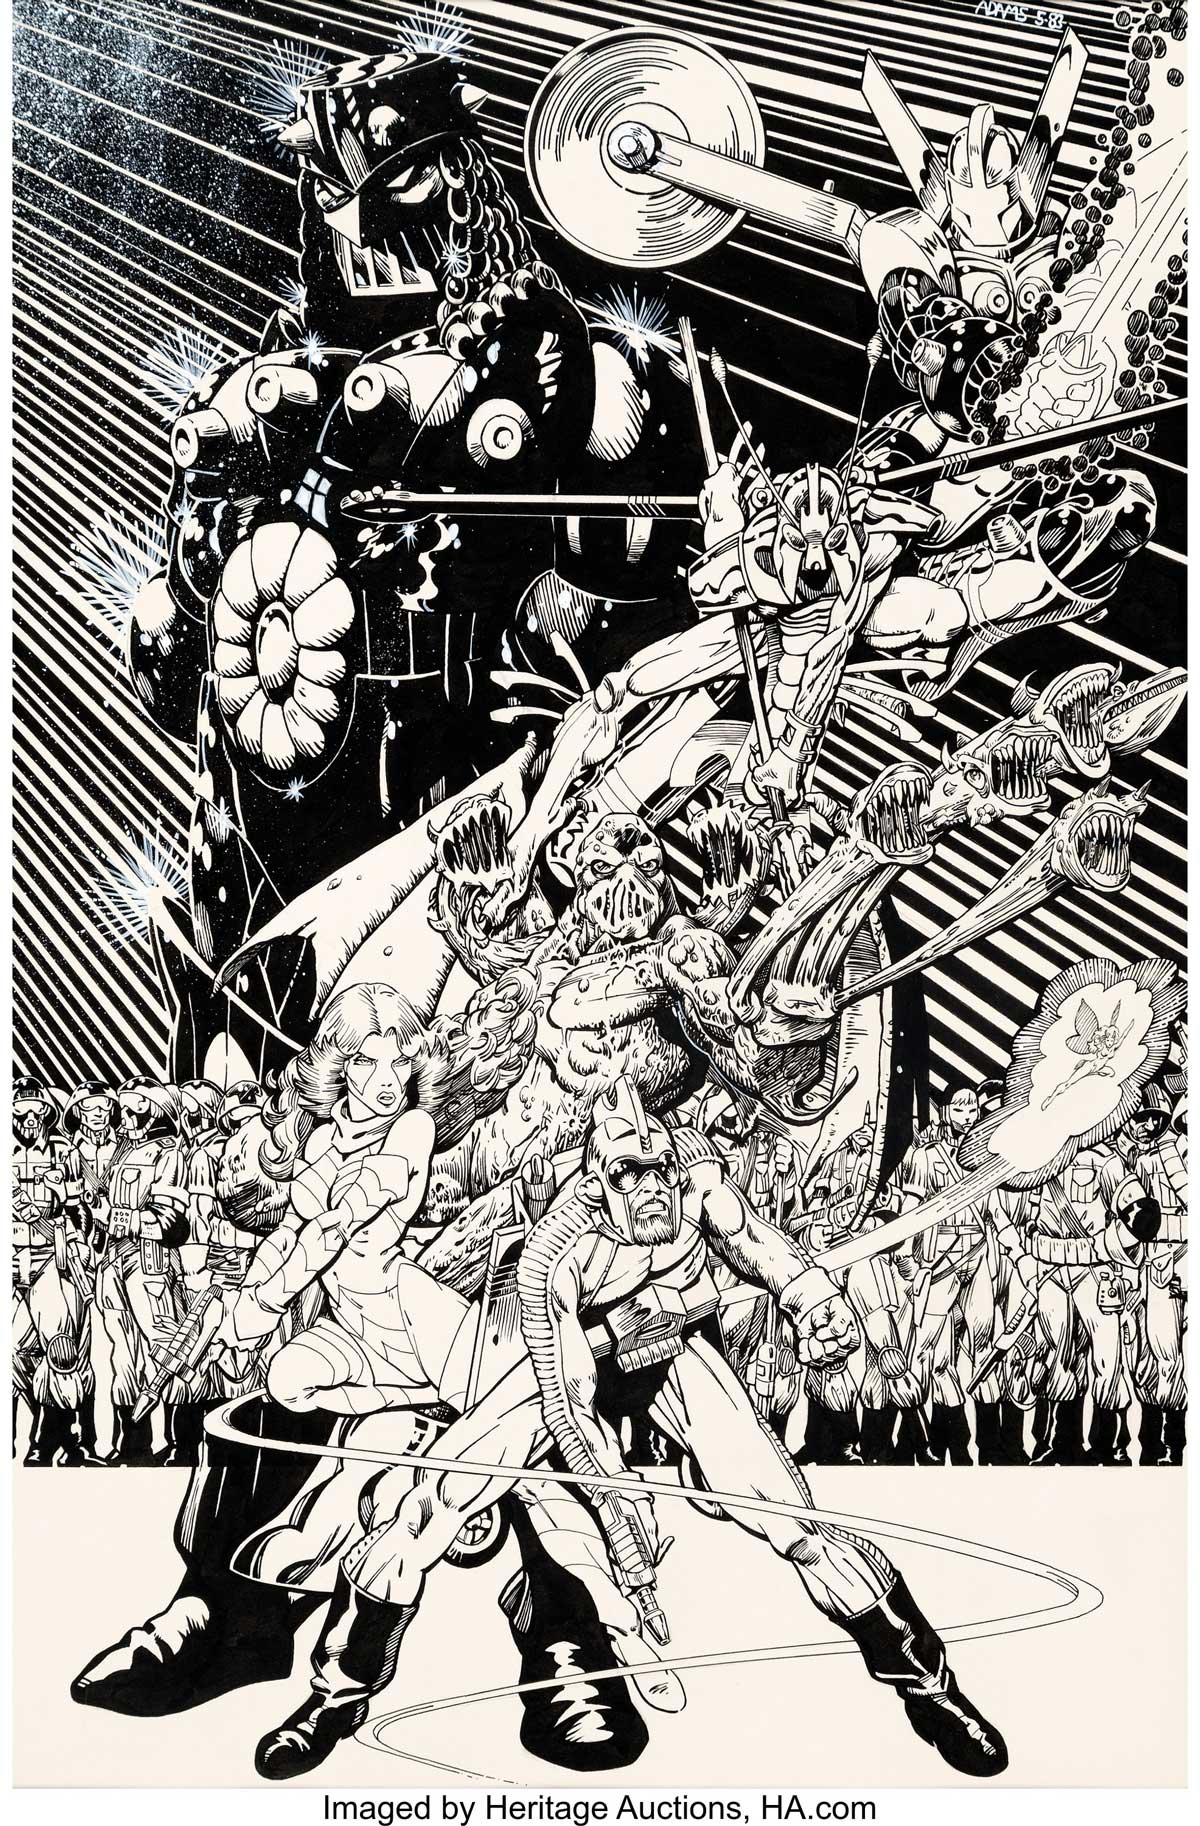 Arthur Adams Micronauts Unpublished Pin-Up Original Art (Marvel, 1983). A piece that pre-dates his first published comics work, this is a simply stop-you-in-your-tracks show-piece, stuffed full of detail and an obvious love for the subject matter! This pin-up features the looming figure of Baron Karza above the main Micronauts players of Acroyear, Bug, Huntarr, Marionette, Fireflyte, and Arcturus Rann (not to mention a slew of Karza's guards).